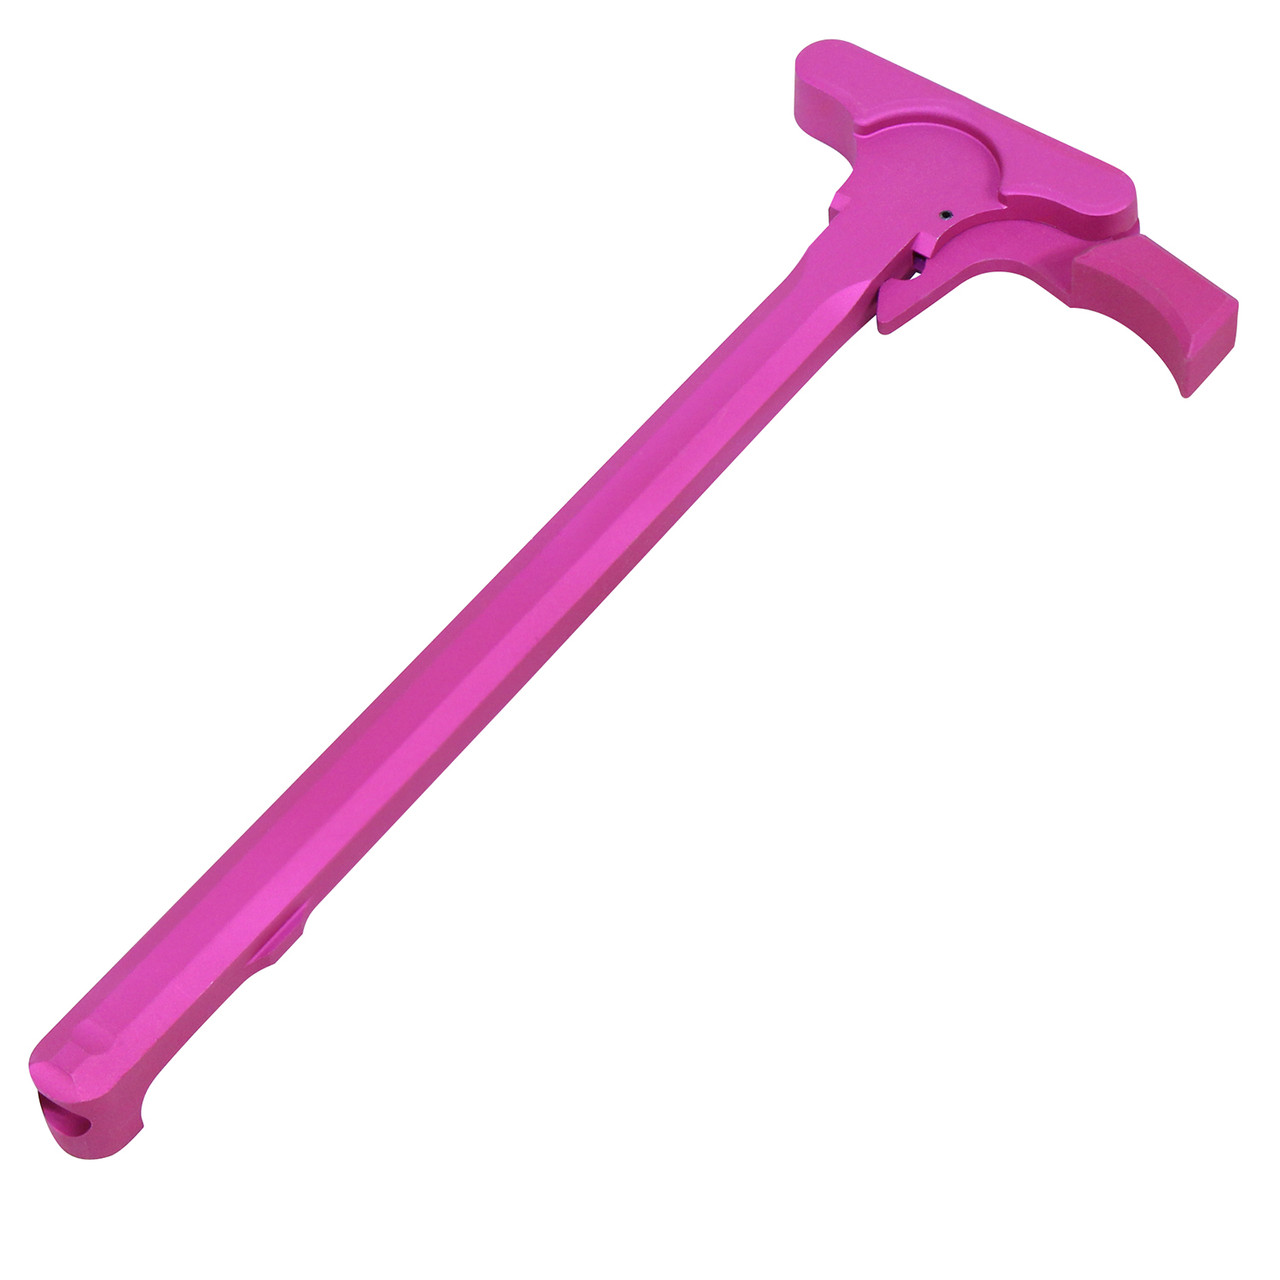 Guntec USA CHARGE-G5-PINK AR-15 Charging Handle With Gen 5 Latch (Anodized Pink)